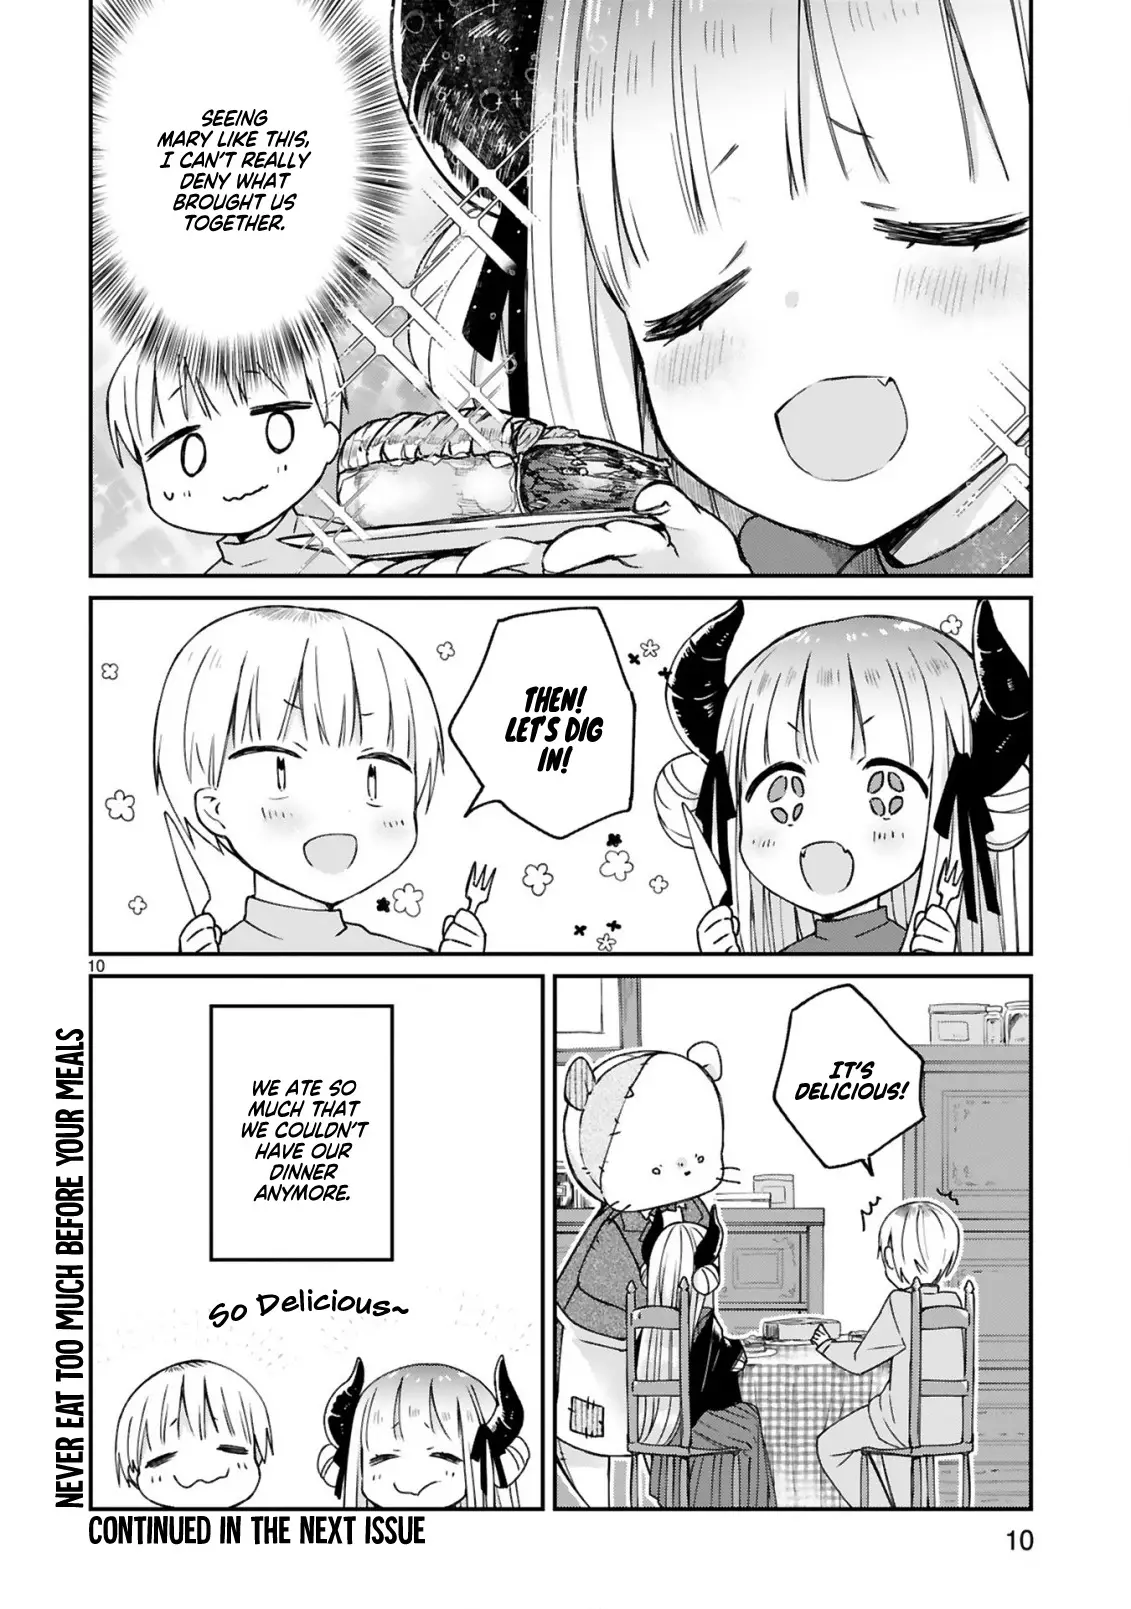 I Was Summoned By The Demon Lord, But I Can't Understand Her Language - 7 page 12